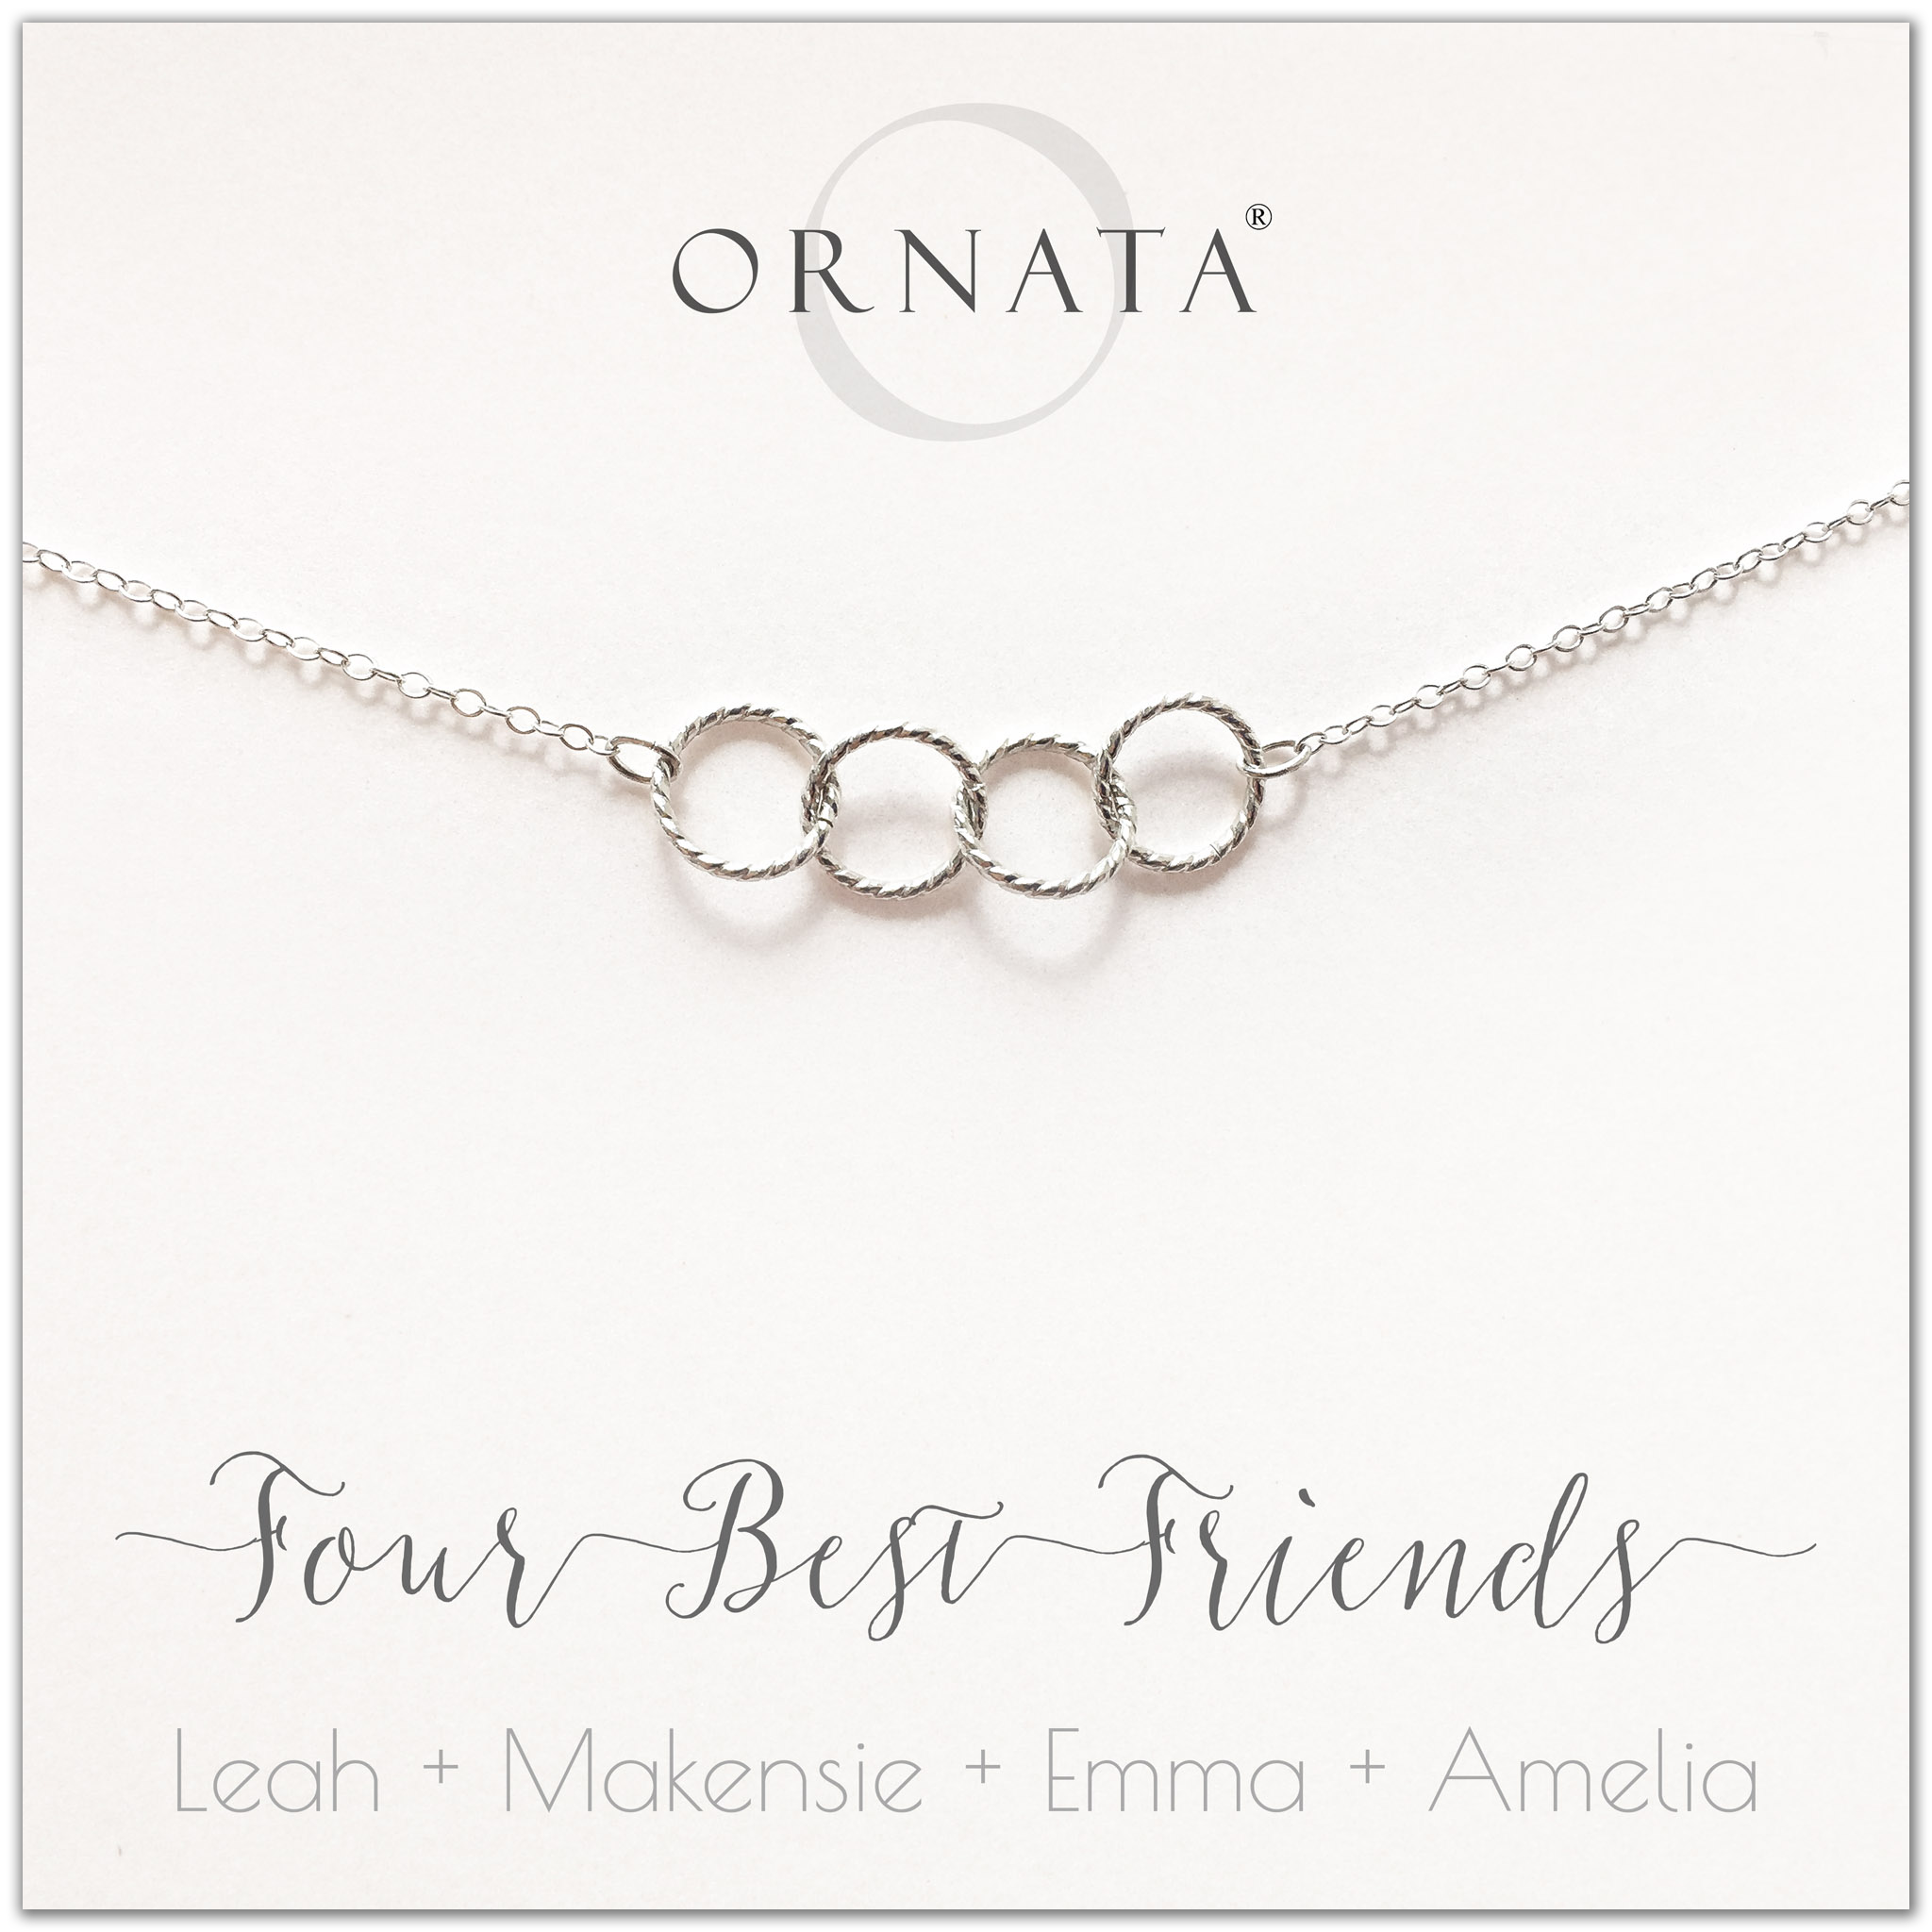 Personalized silver necklaces for four best friends. Our sterling silver custom jewelry is a perfect gift for a sister or best friend. Friendship necklaces for 4 best friends. Represents 4 best friends with sterling silver interlocking rings. 